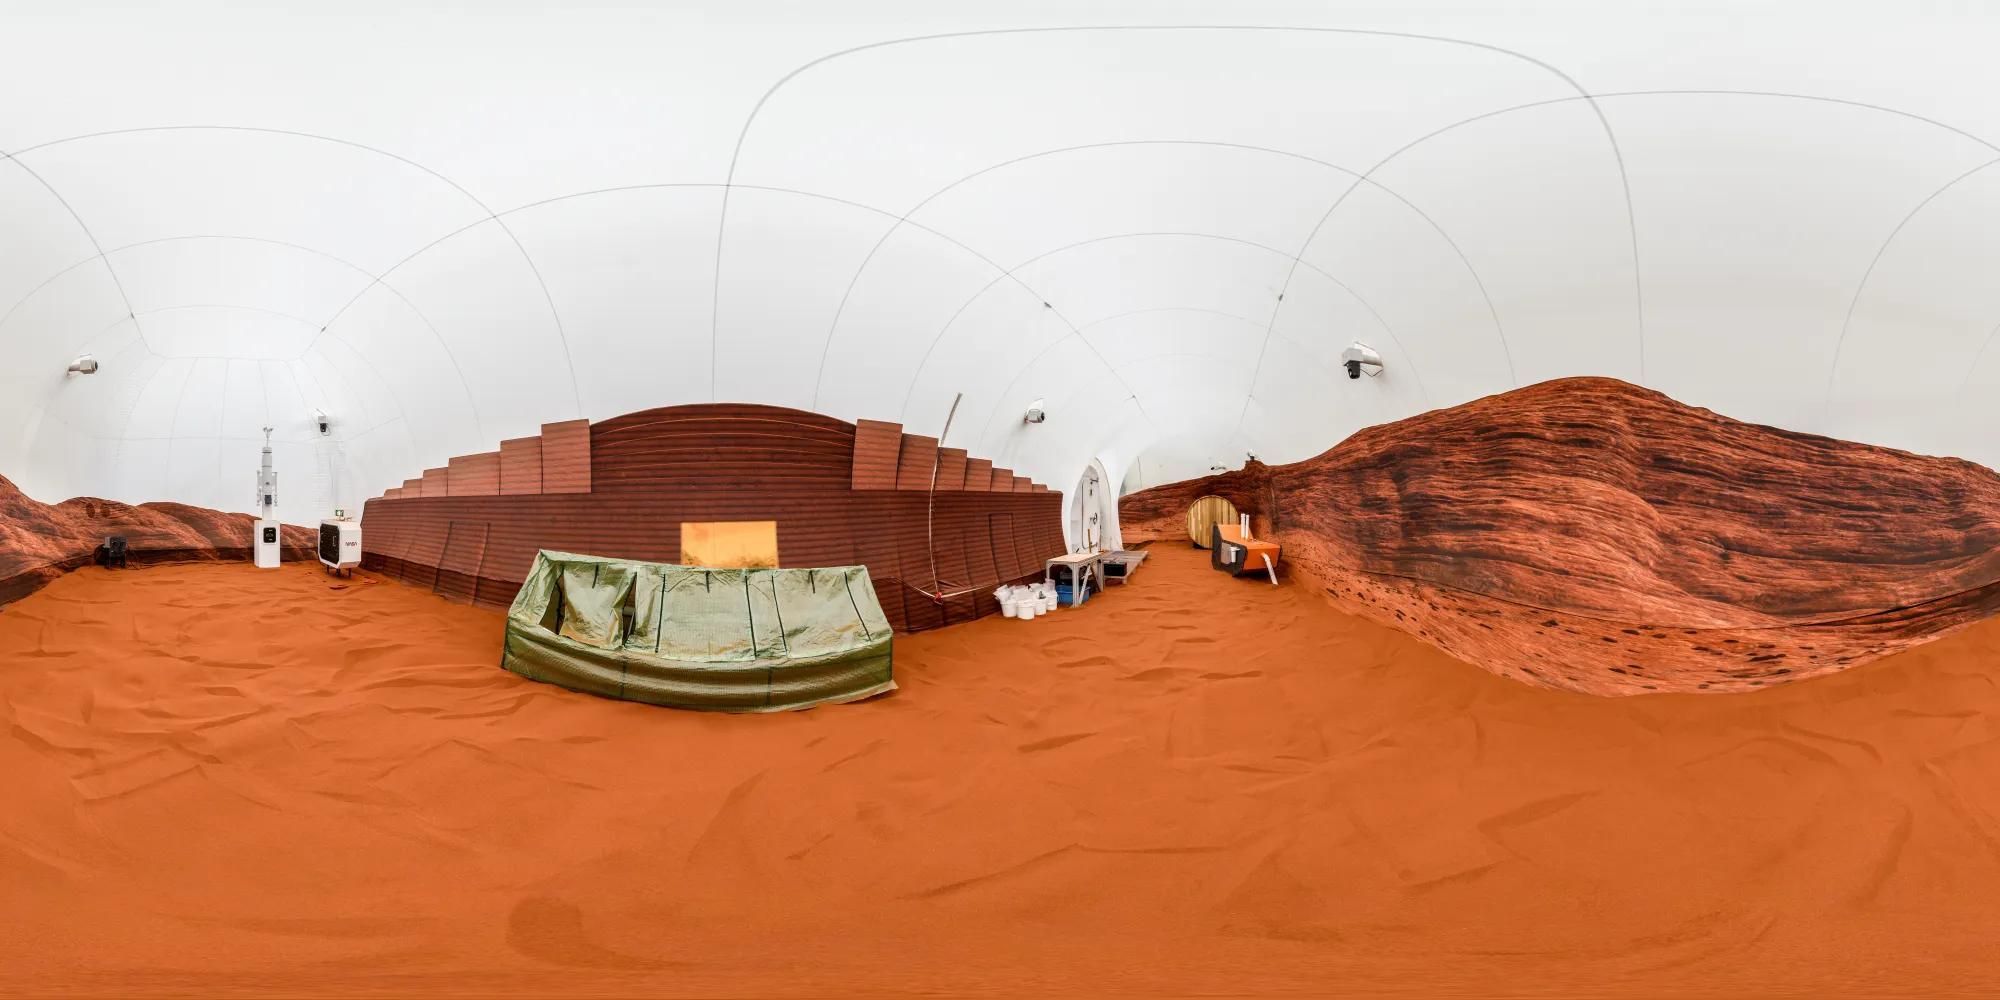 The simulated Martian environment will put Earth-bound 'astronauts' to the test